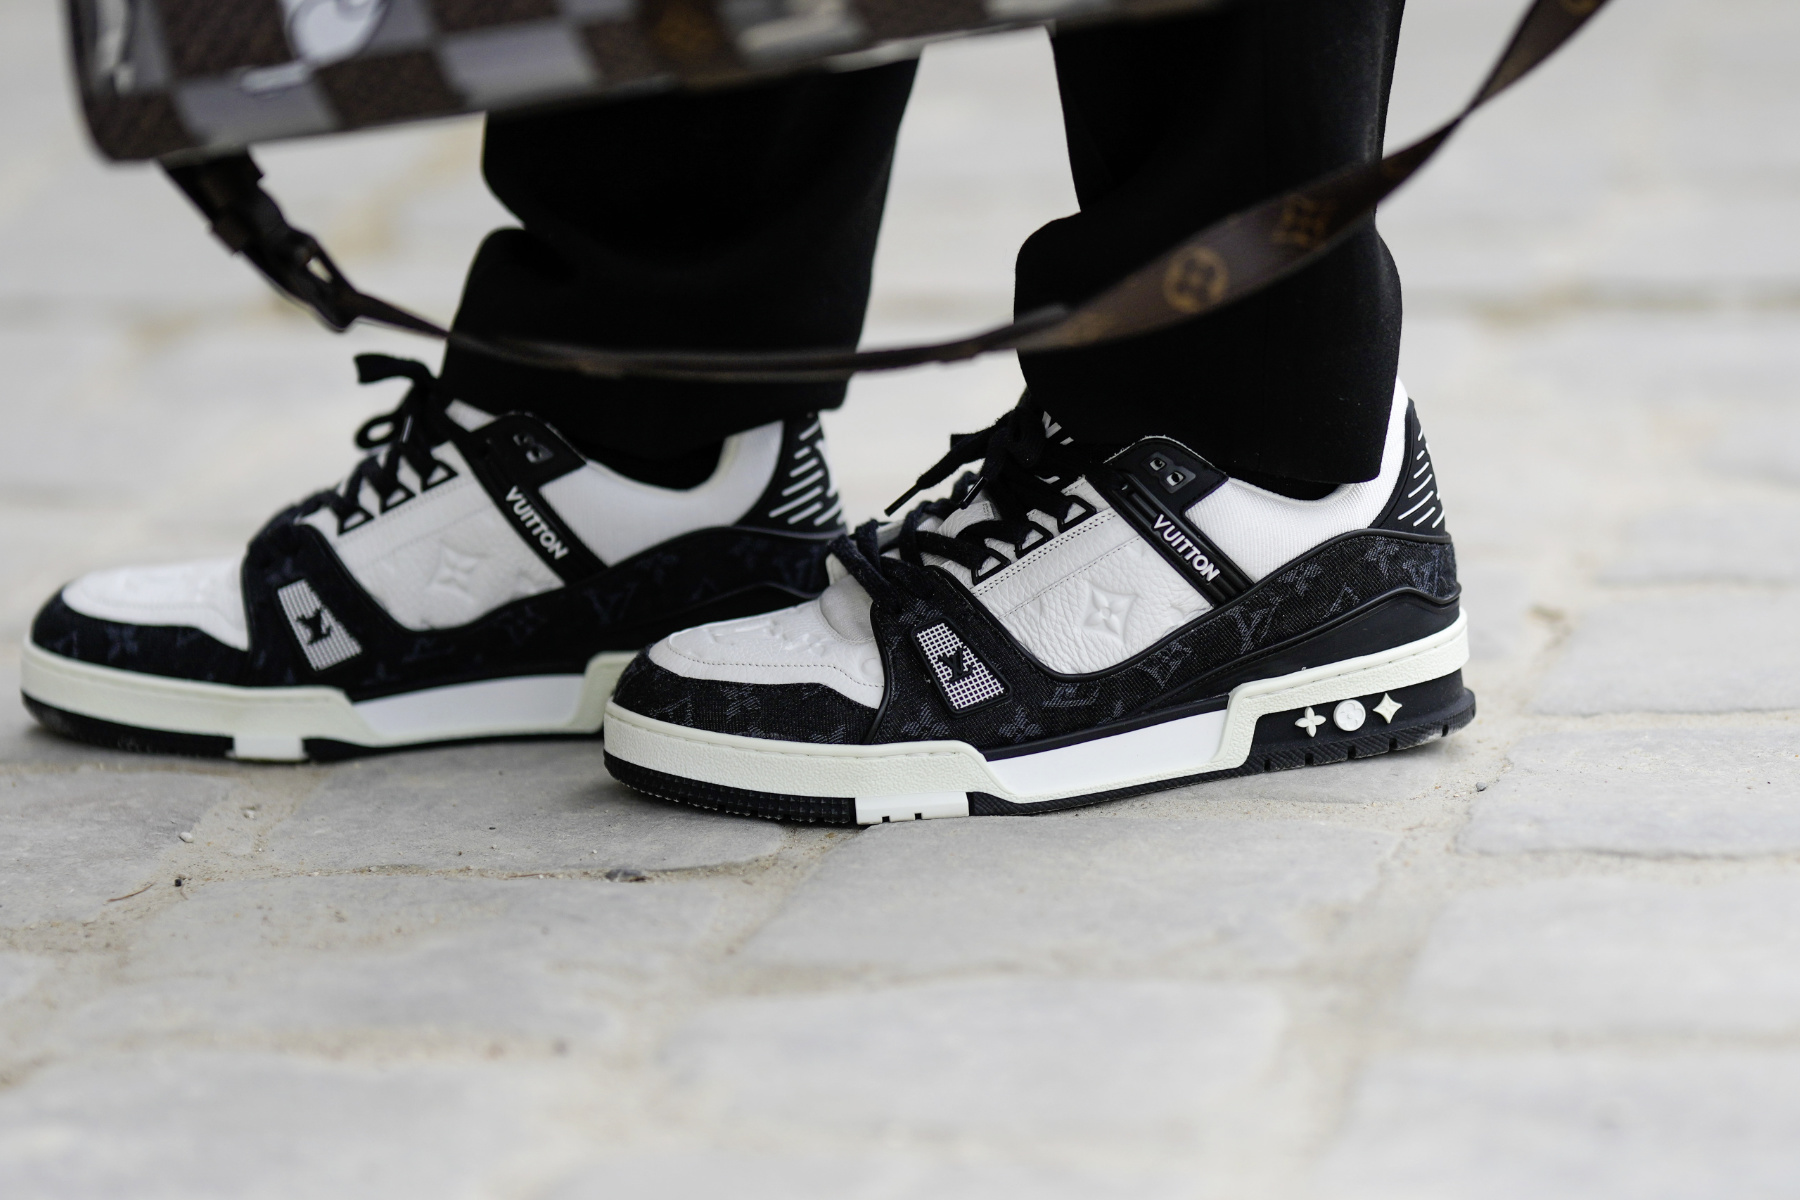 Louis Vuitton brings its chunky sneakers back with the new